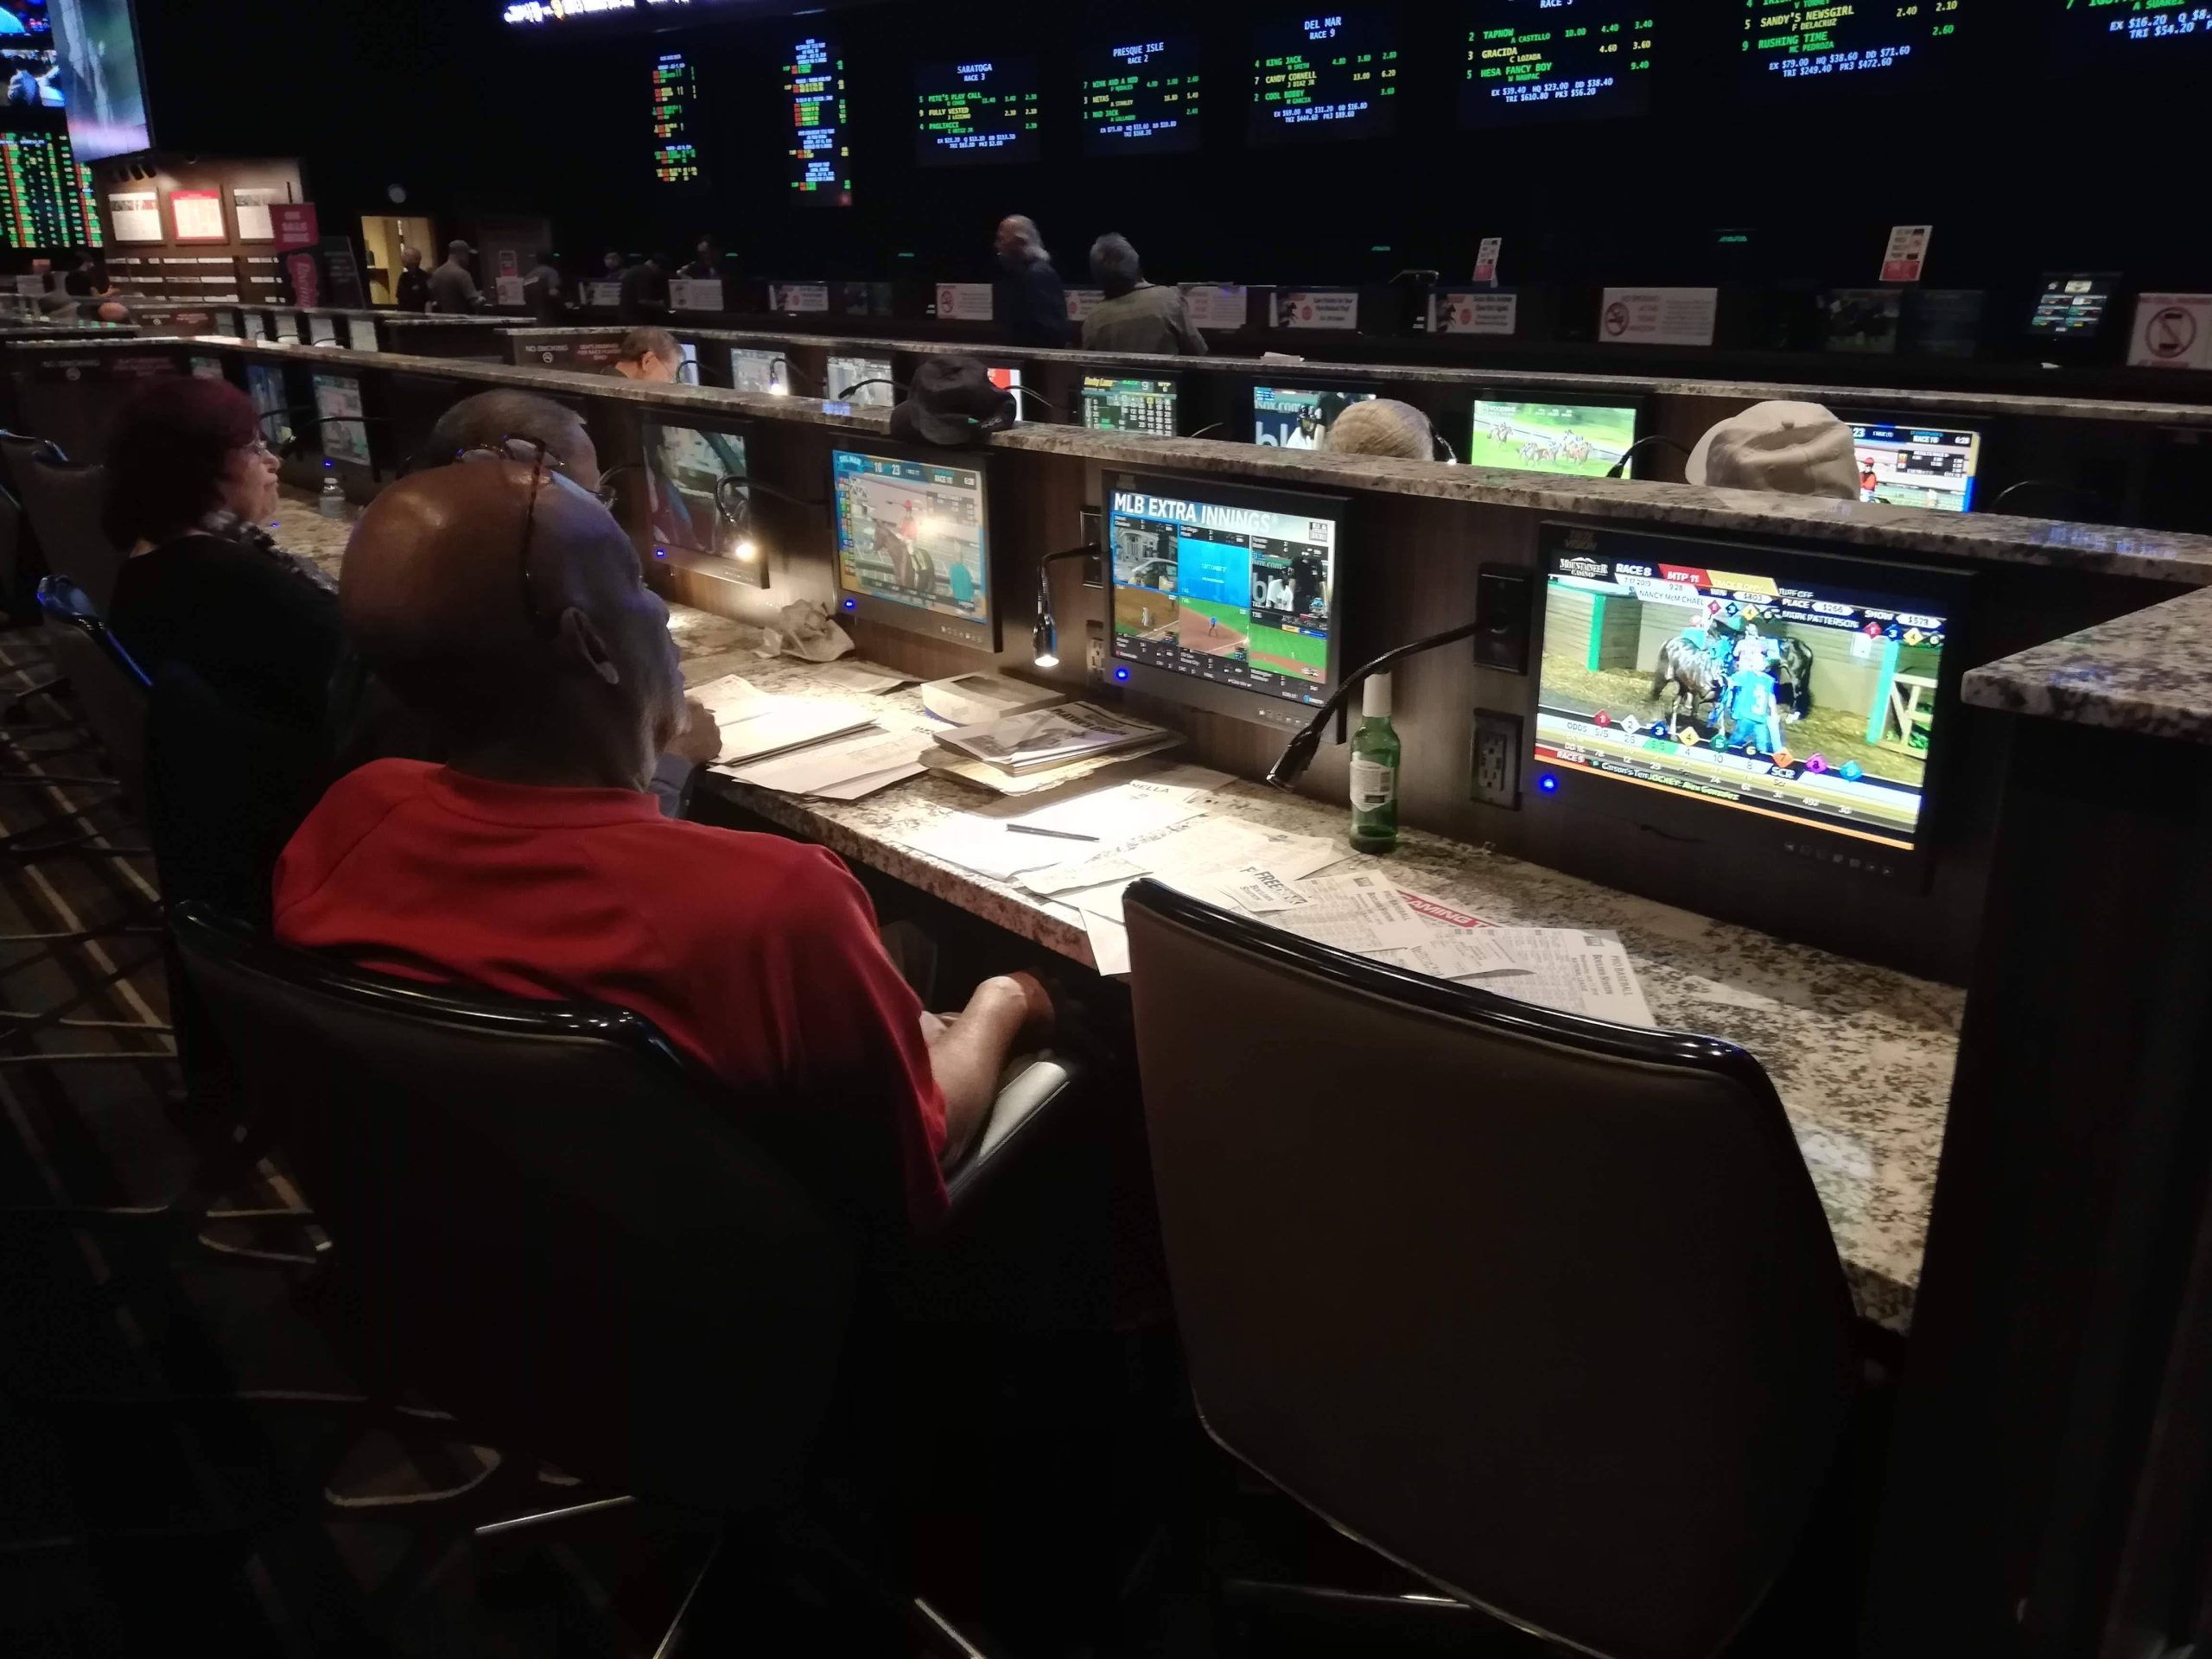 Selling Picks If You’re Not a Winning Handicapper: The Truth About the Sports Betting Industry